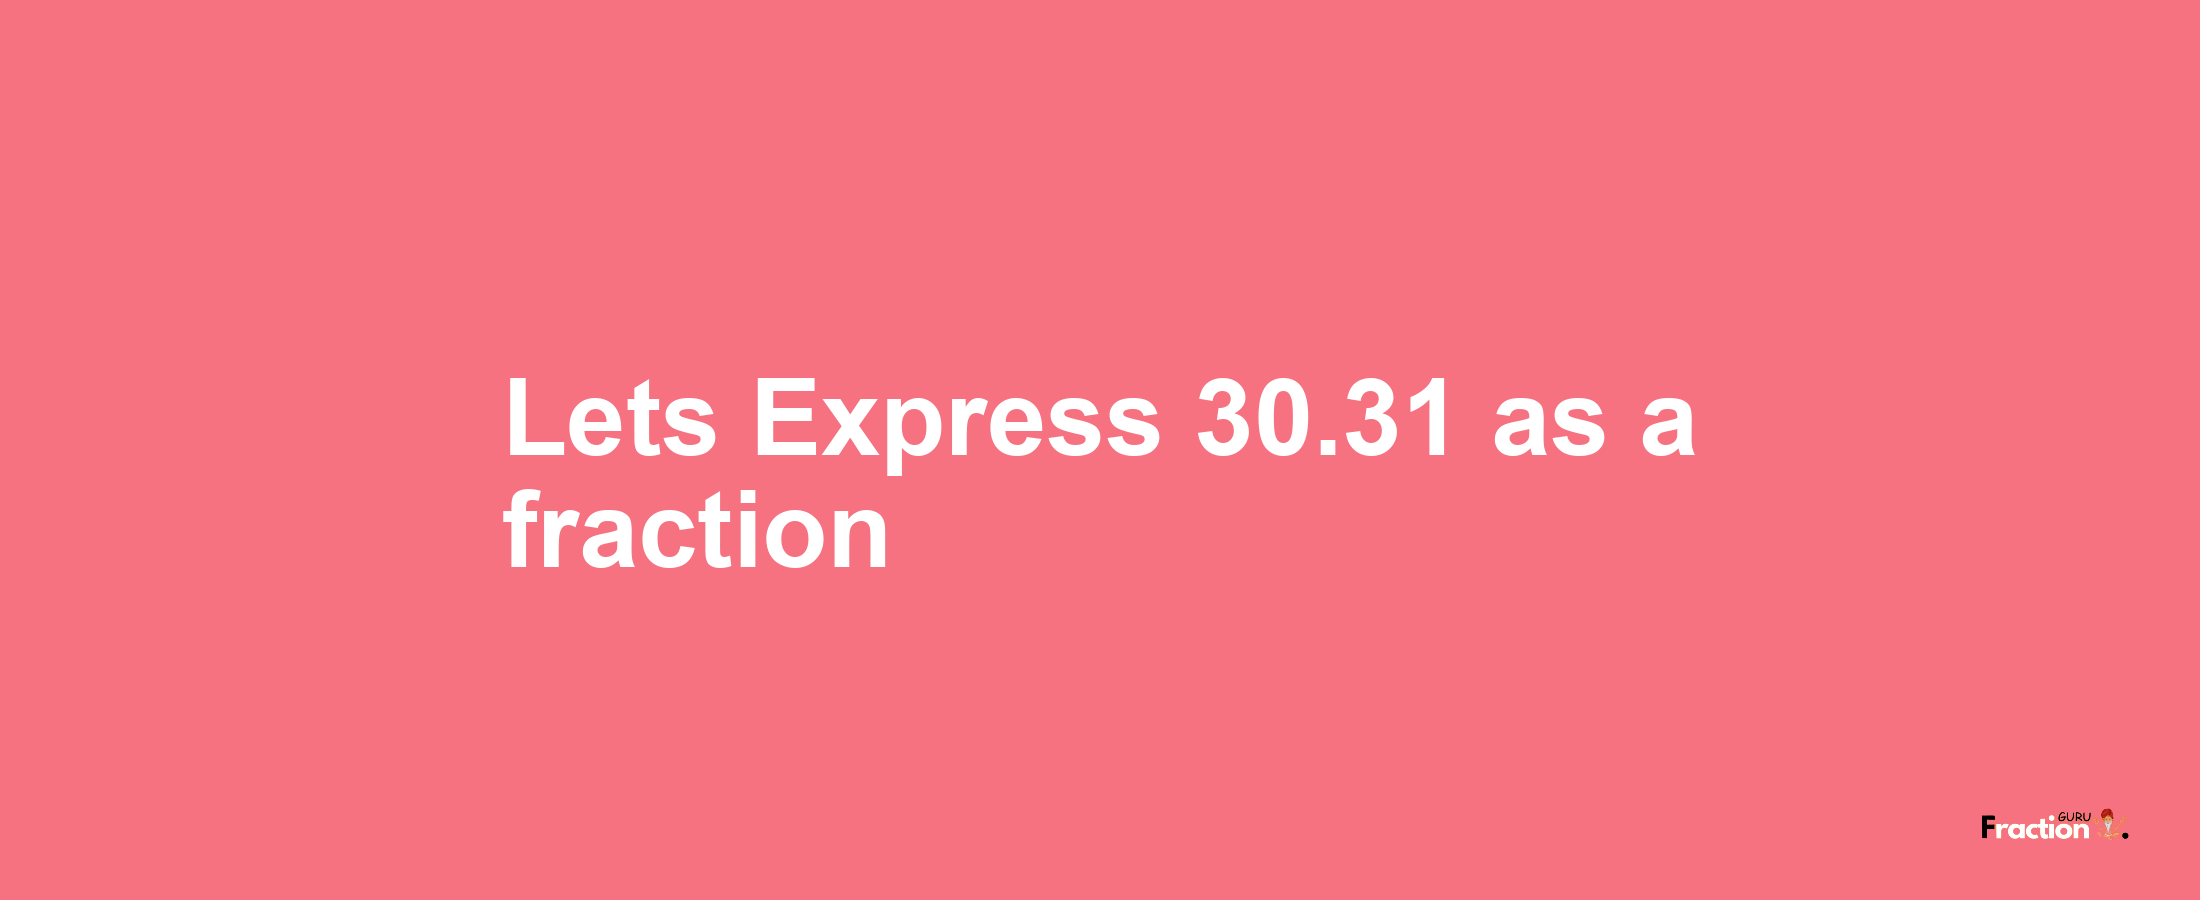 Lets Express 30.31 as afraction